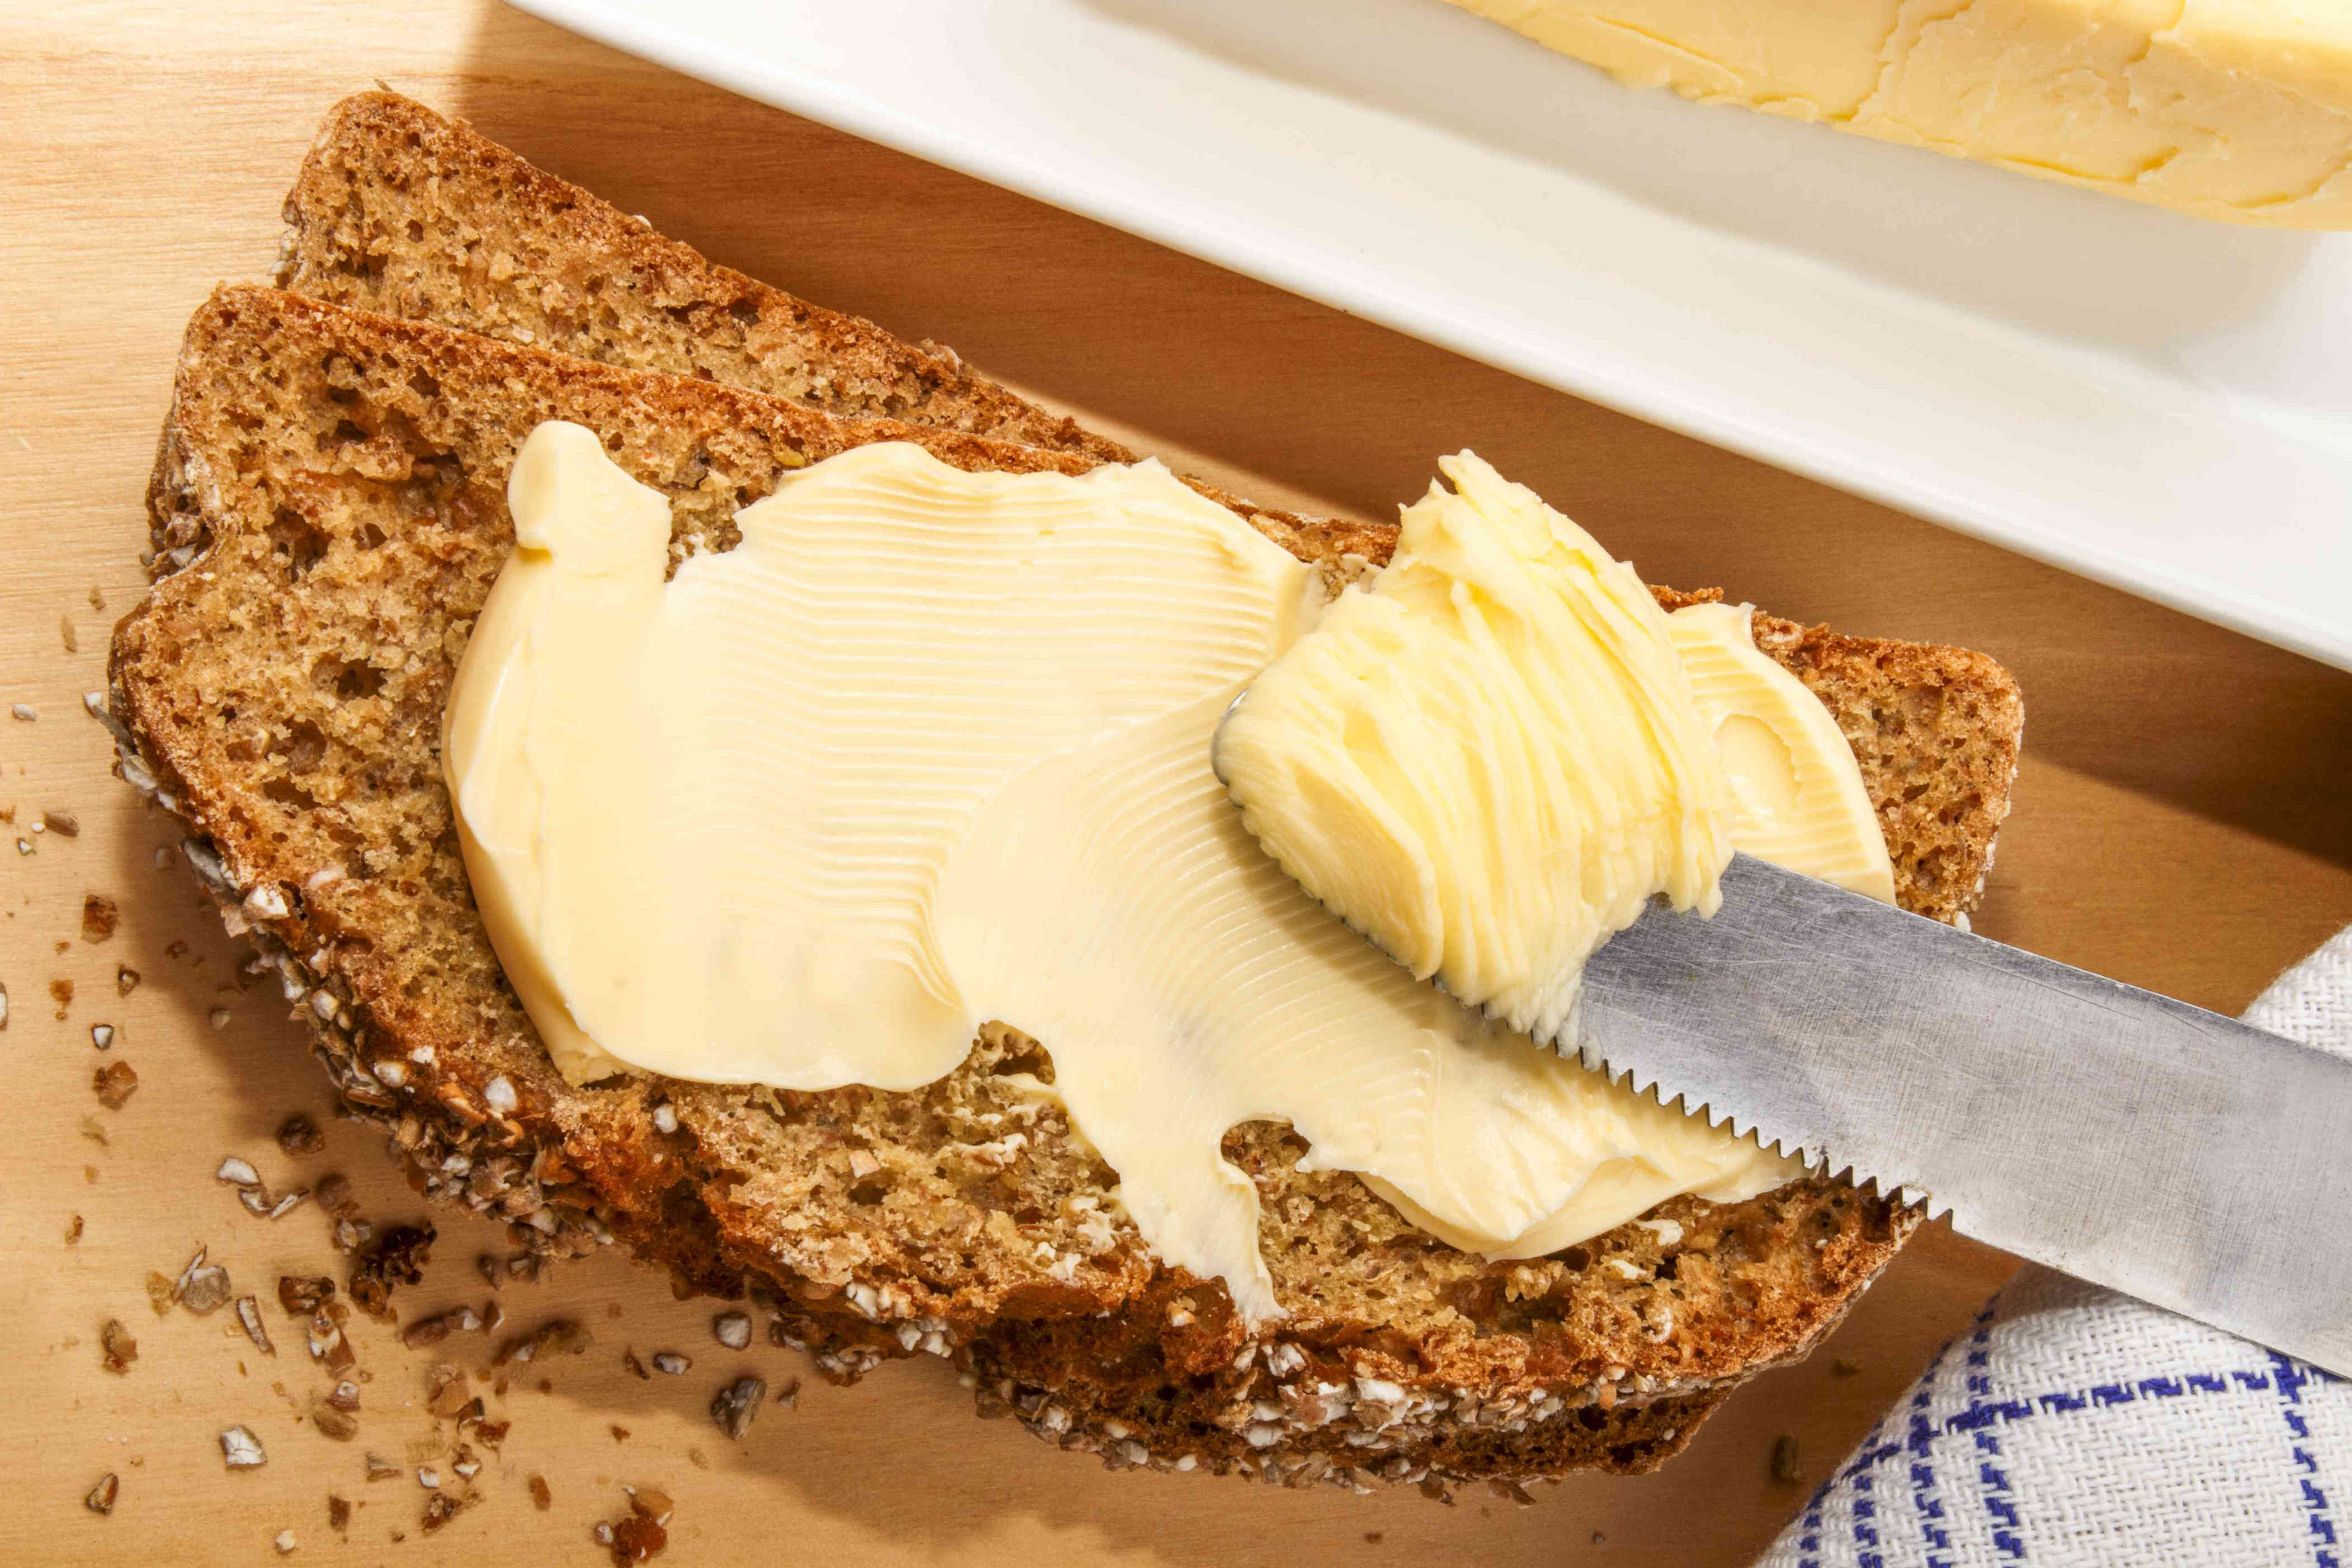 This $3.99 Butter Was Just Named the Best In the World—It Beat Out a Popular French Brand